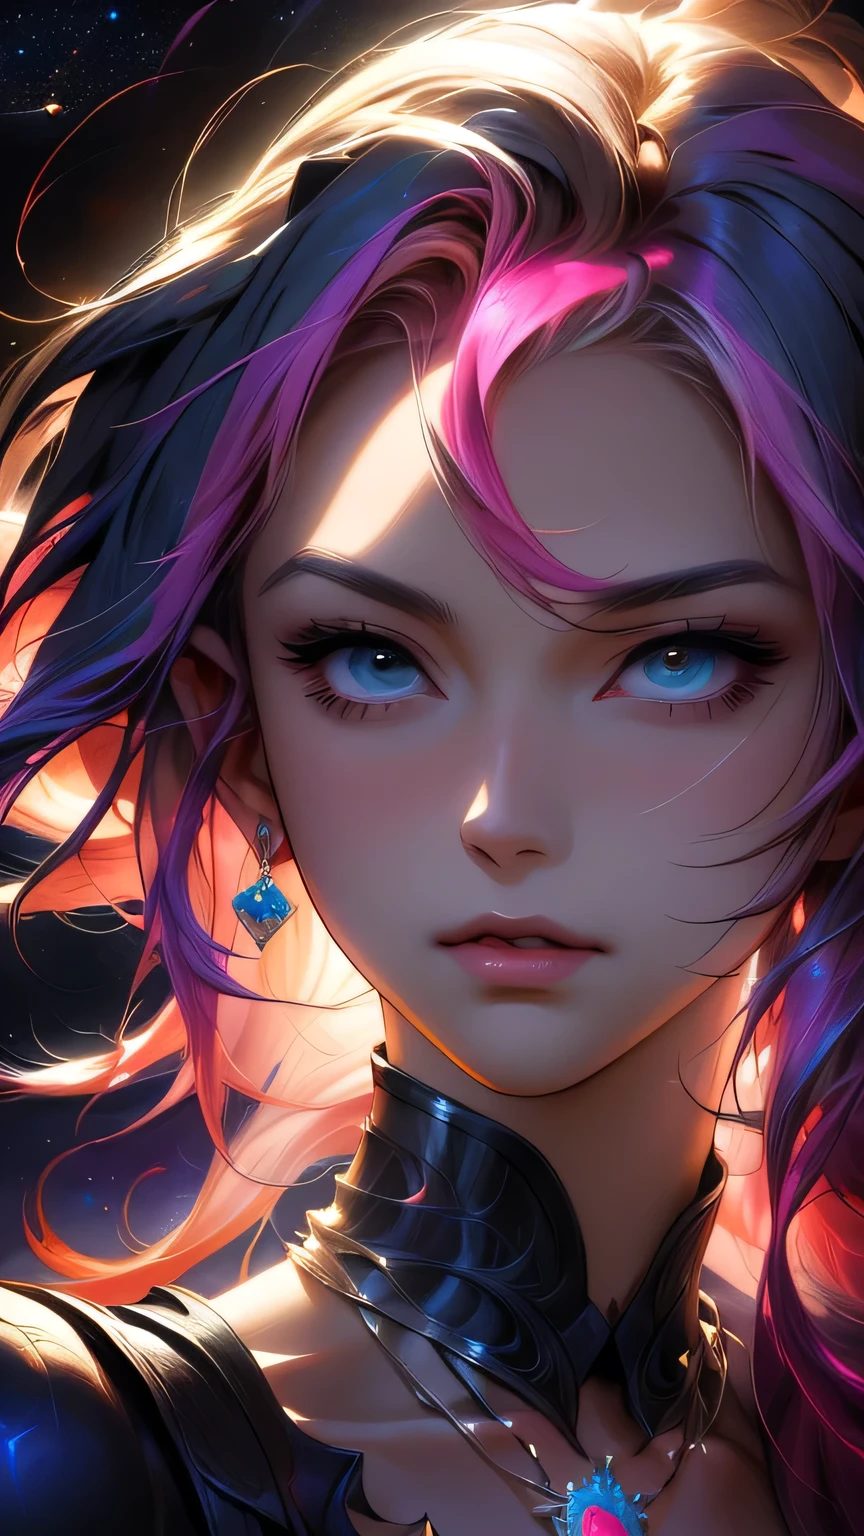 Close-up of a woman with colorful hair and necklace, Anime girl with space-like hair, The gentle vitality of rose roses, Gubes-style artwork, Fantasy art style, colorful], Vivid fantasy style, Ross draws vibrant cartoons, cosmic and colorful, Gwaiz, colorful digital fantasy art, Great art style, Beautiful anime style, Full body lighting, Skin Brightness, Sexy look, (Dynamic pose)､ masterpiece, 最high quality, high quality, High resolution､((Face close-up))､